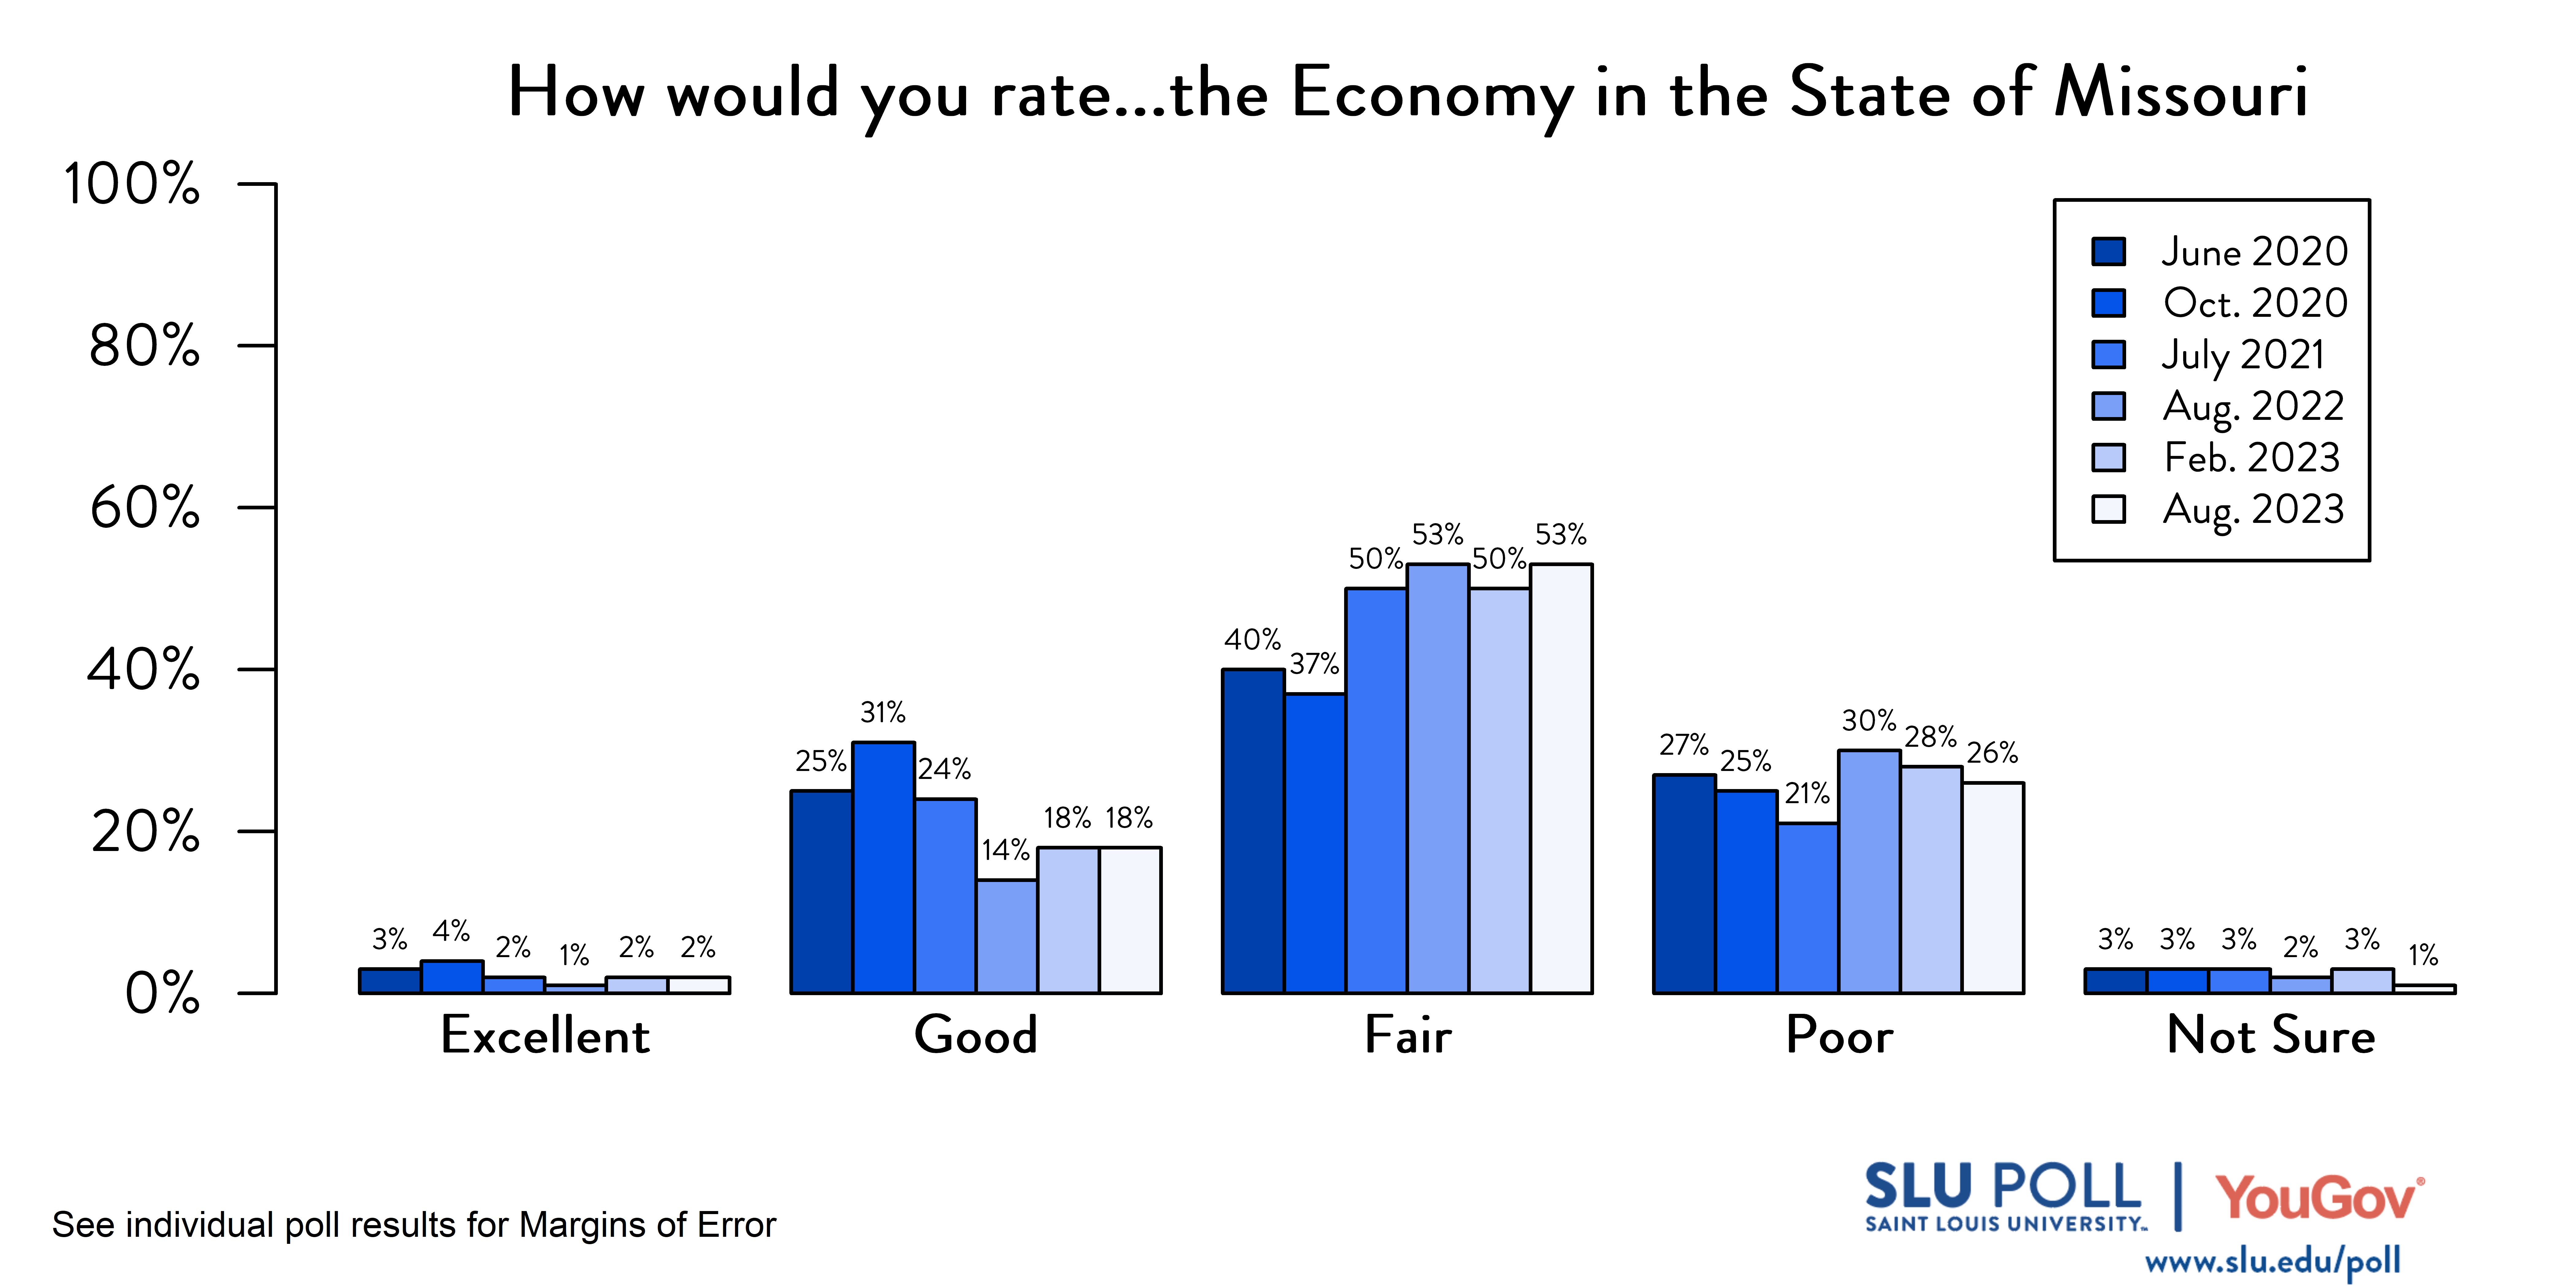 Likely voters' responses to 'How would you rate the condition of the following: The Economy in the State of Missouri?'. June 2020 Voter Responses 3% Excellent, 25% Good, 40% Fair, 27% Poor, and 3% Not Sure. October 2020 Voter Responses: 4% Excellent, 31% Good, 37% Fair, 25% Poor, and 3% Not sure. July 2021 Voter Responses: 2% Excellent, 24% Good, 50% Fair, 21% Poor, and 3% Not sure. August 2022 Voter Responses: 1% Excellent, 14% Good, 53% Fair, 30% Poor, and 2% Not sure. February 2023 Voter Responses: 2% Excellent, 18% Good, 50% Fair, 28% Poor, and 3% Not sure. August 2023 Voter Responses: 2% Excellent, 18% Good, 53% Fair, 26% Poor, and 1% Not sure.